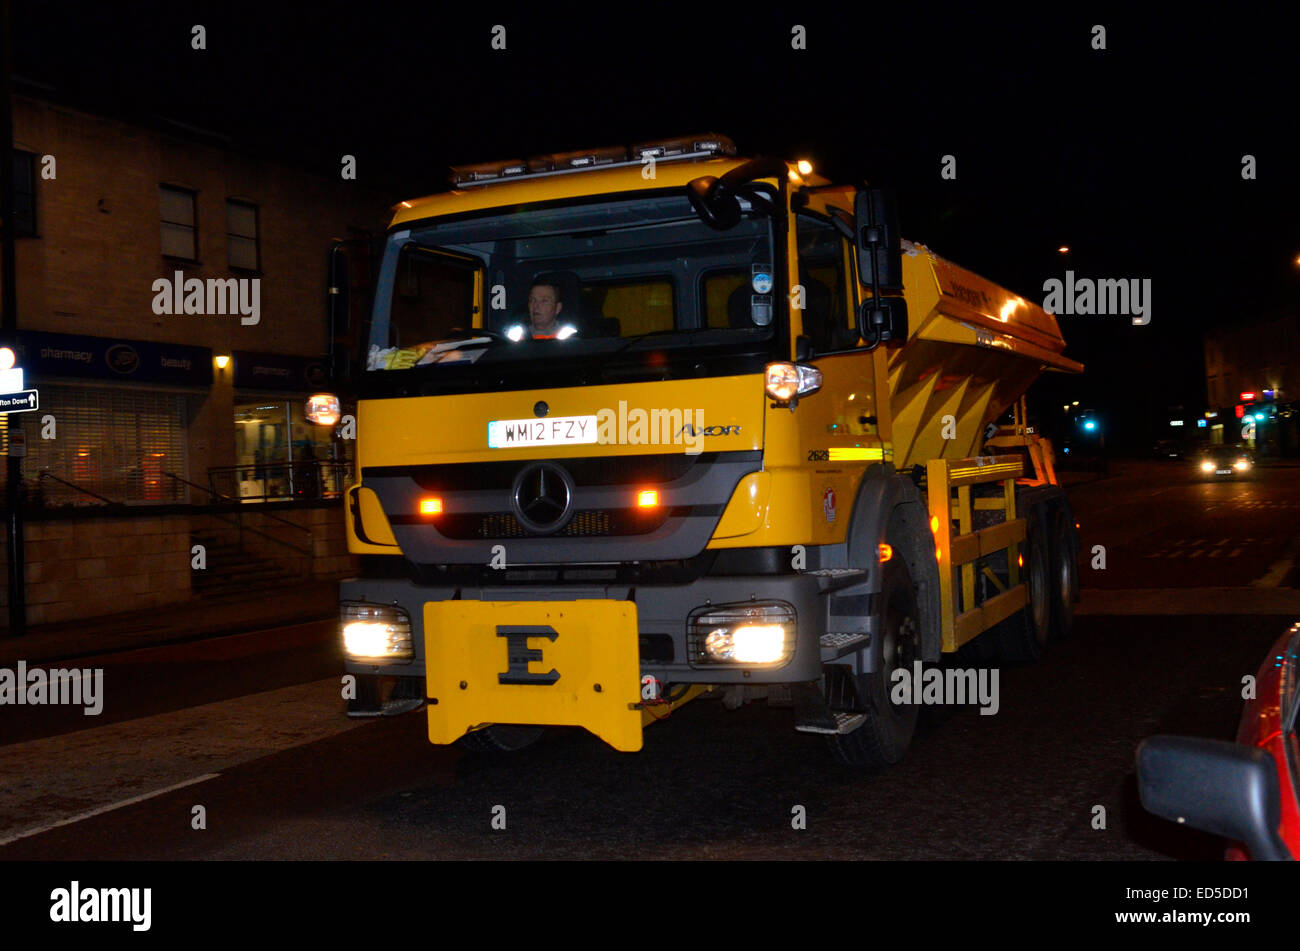 Bristol, UK. 28th December, 2014. UK Weather. Getting ready for a very cold night on the roads, a gritting lorry for bad weather seen on the streets of Bristol . Location Whiteladies Road. Credit:  Robert Timoney/Alamy Live News Stock Photo